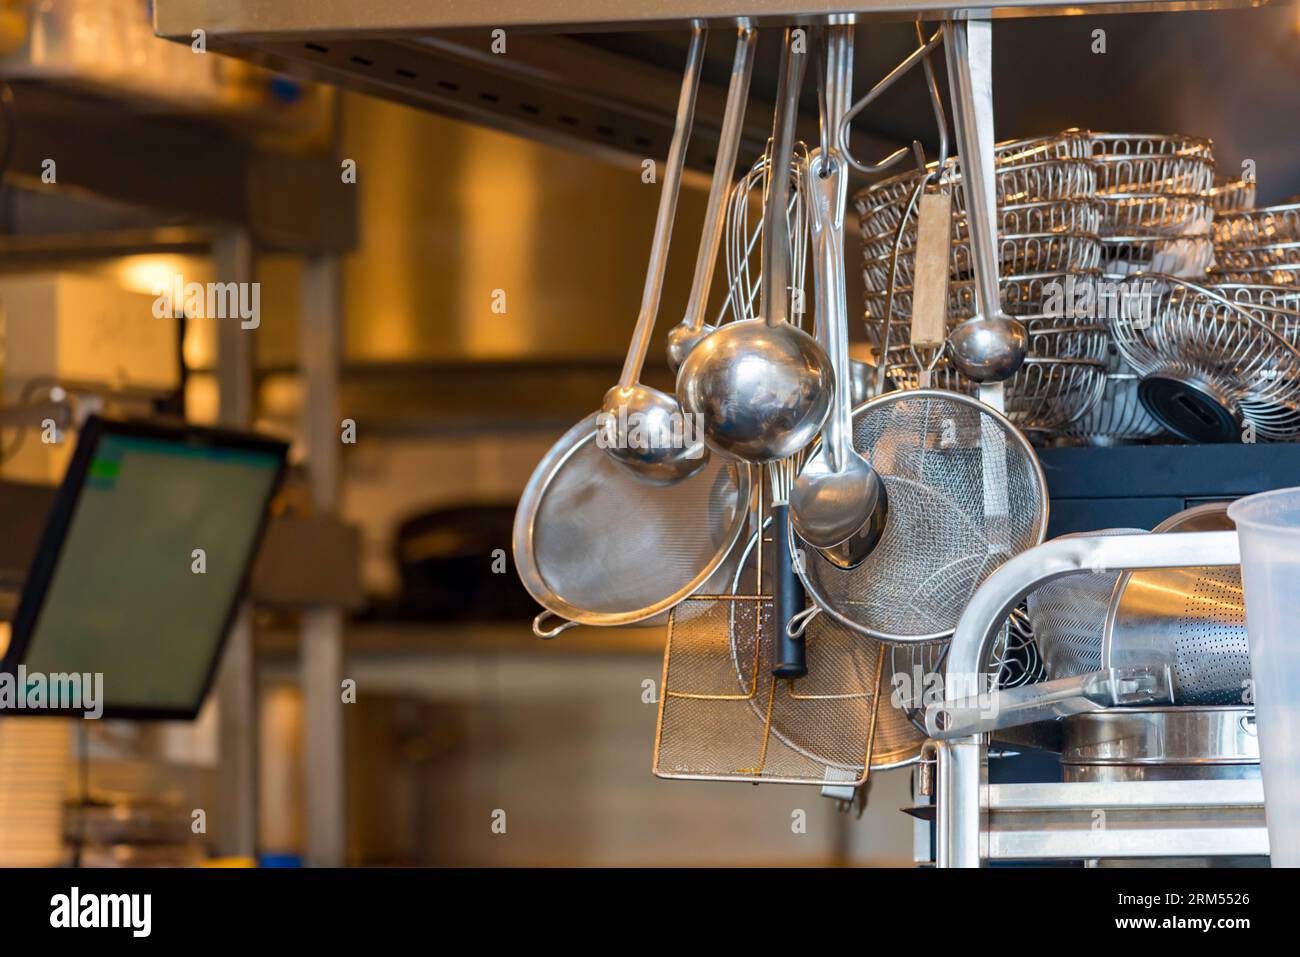 Stainless steel scoops, strainers and other utensils hanging in the doorway of a professional kitchen in Sydney, Australia Stock Photo